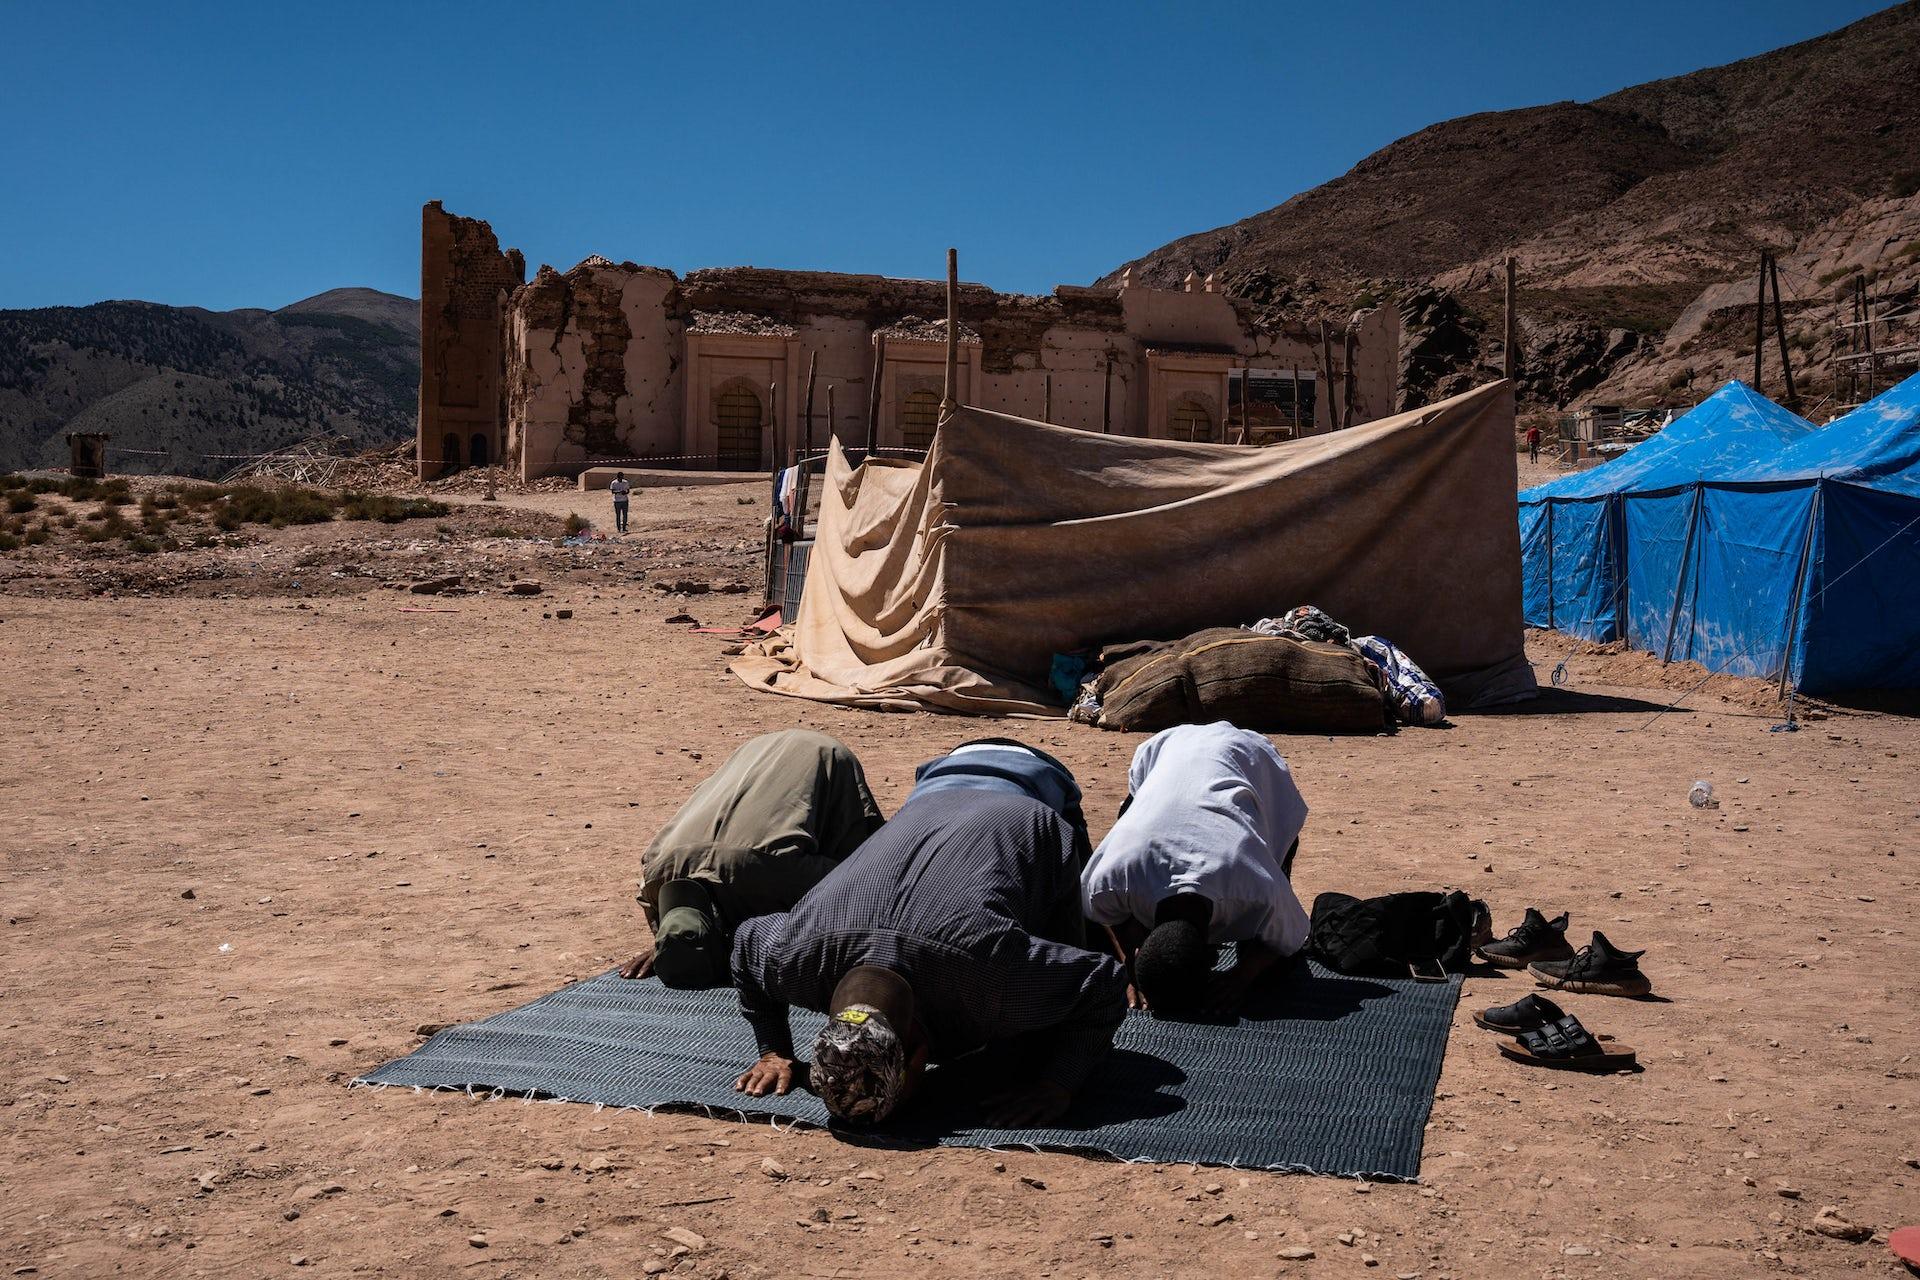 Three people prostrating in prayer on a mat. In the backdrop are mountains and a damaged ancient brick structure.